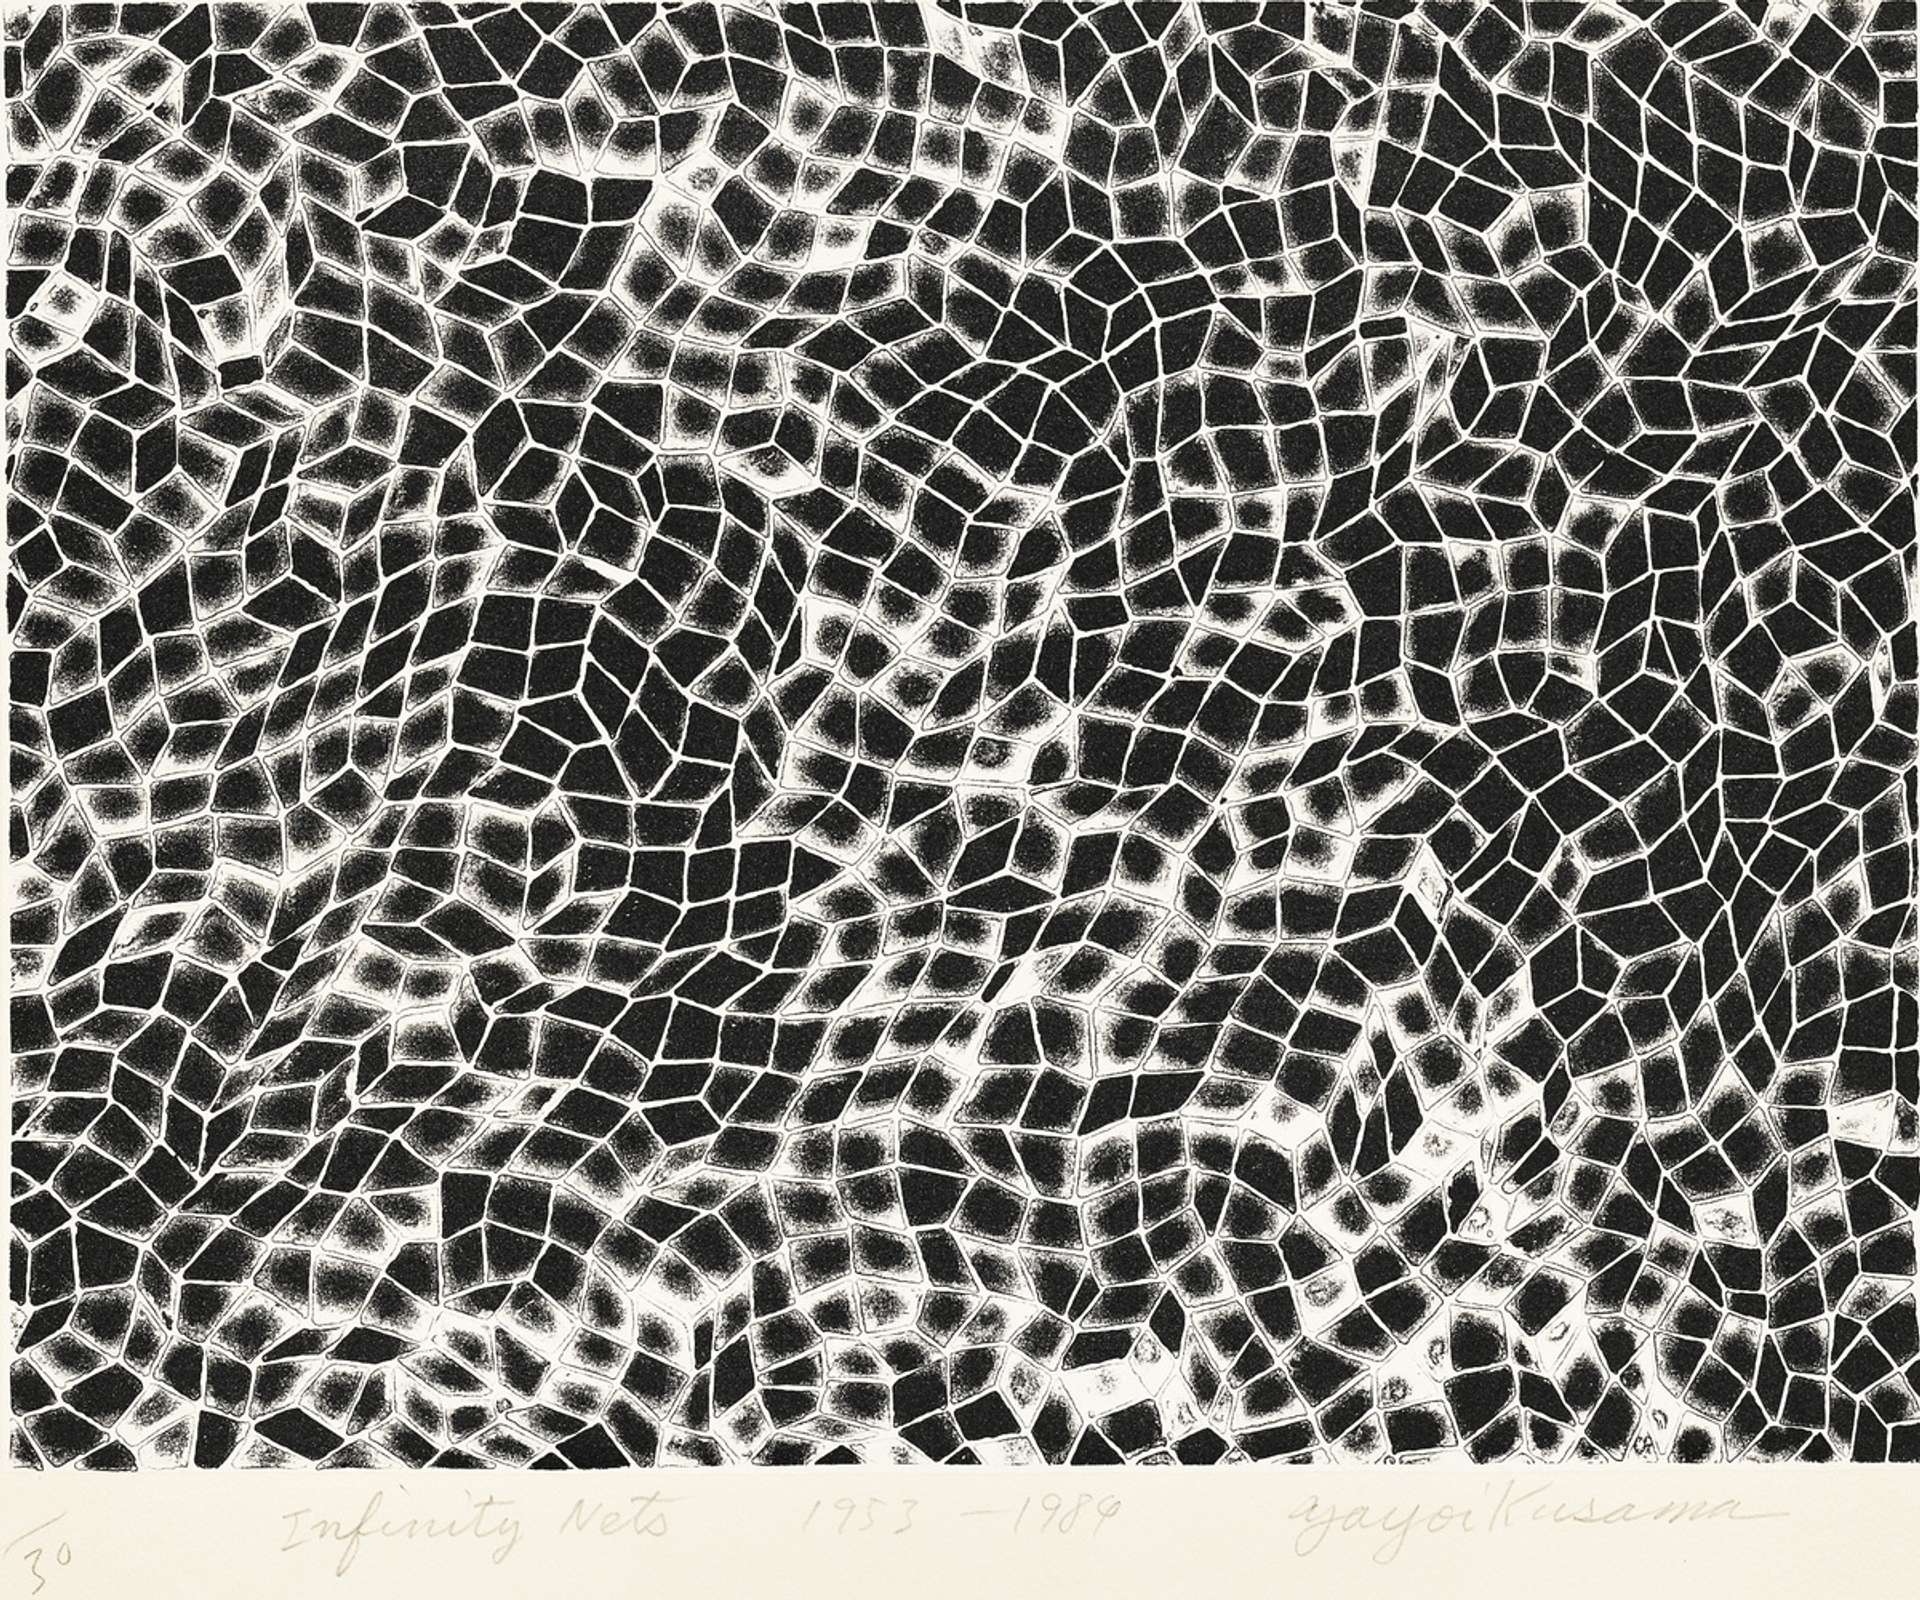 Yayomi Kusama's Infinity Nets. A lithographic print of webbed white lines over a black background. 